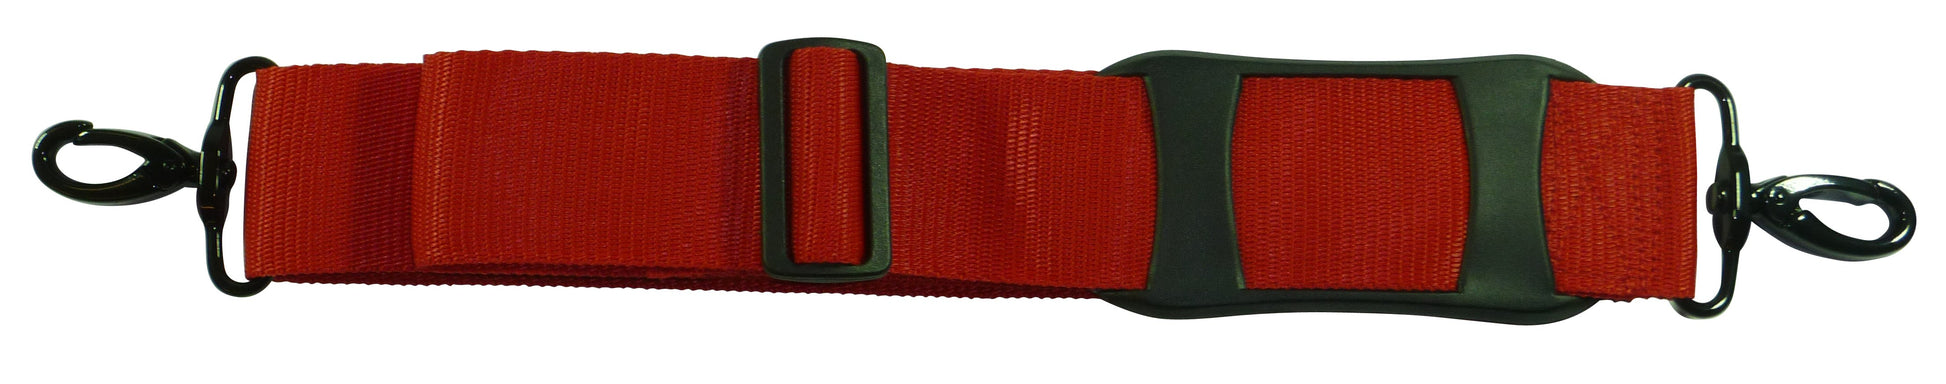 Benristraps 50mm Bag Strap with Metal Buckles and Shoulder Pad, 175cm in red